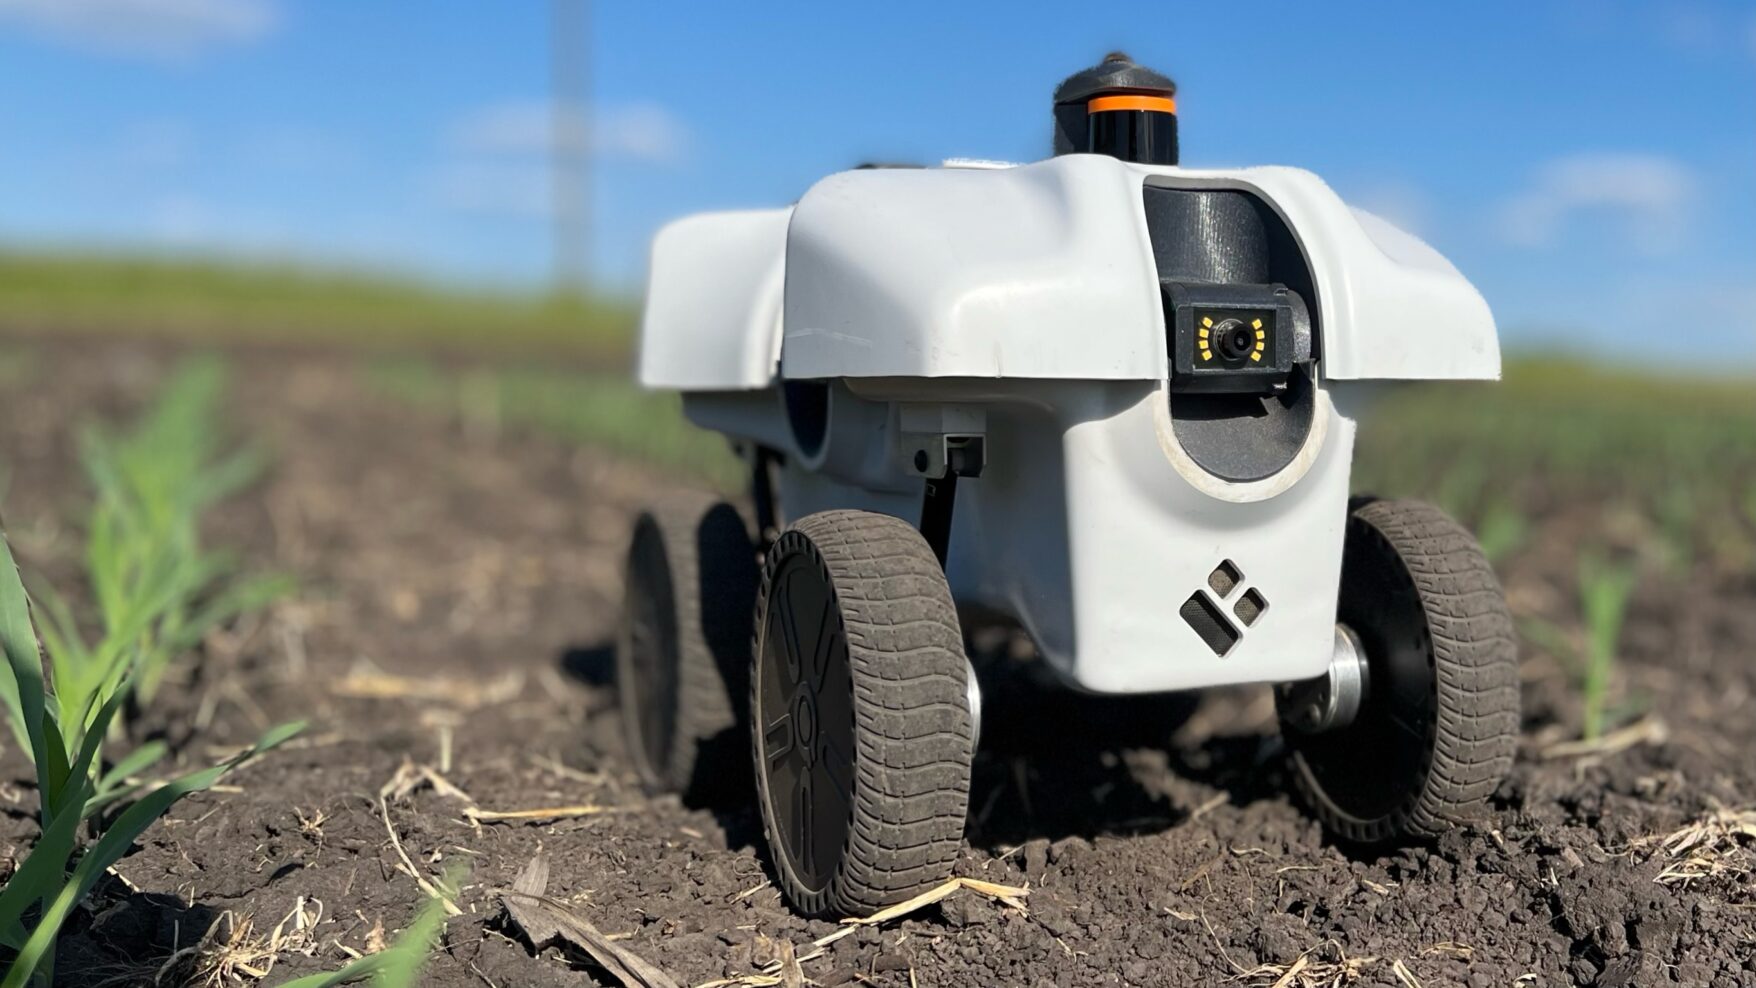 EarthSense TerraSentia robot developed at Illinois that phenotypes and collects data in crop plots.